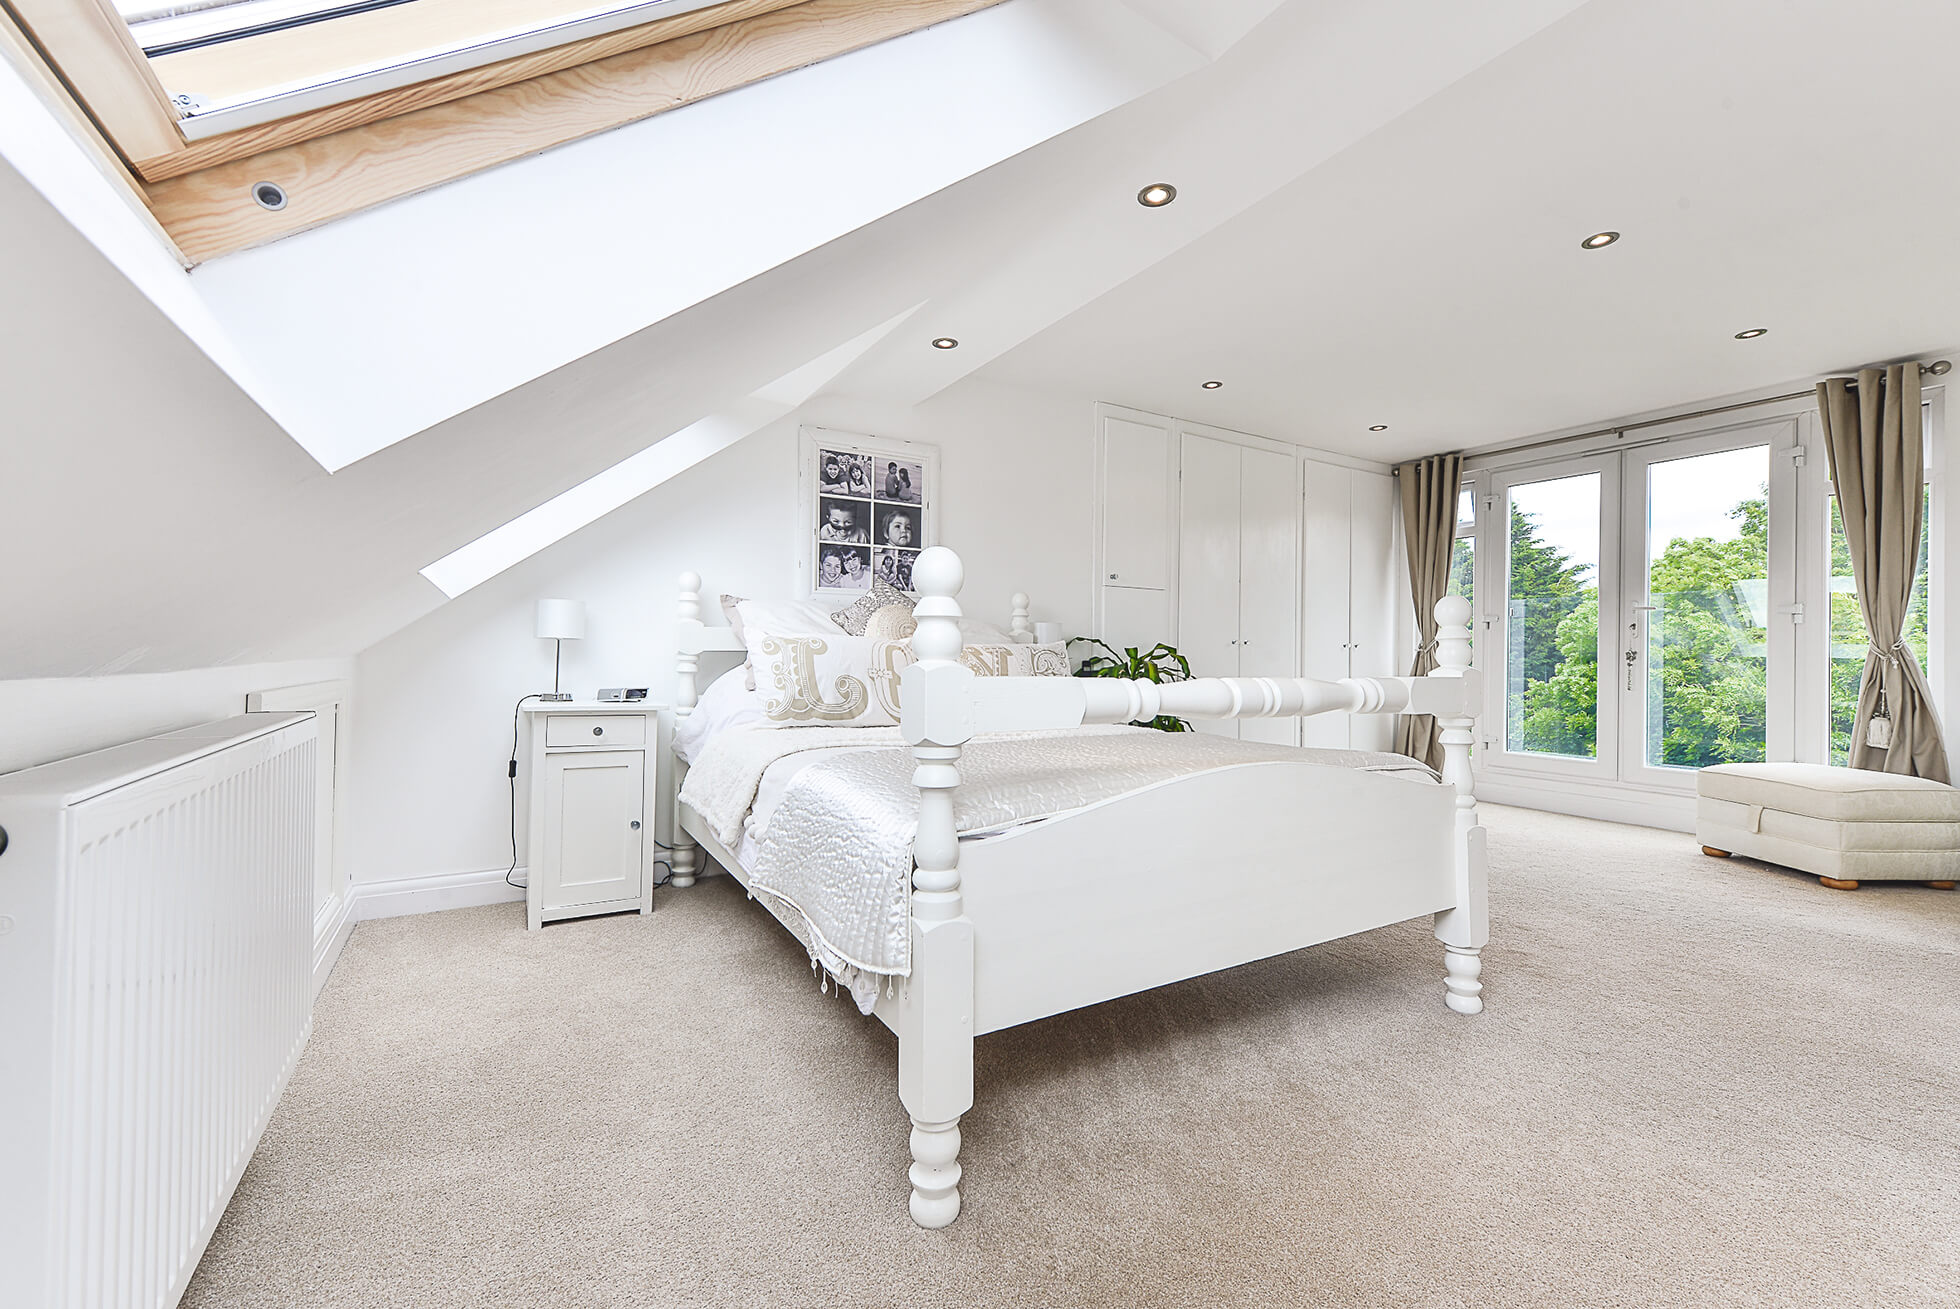 Do you have a question about converting your Loft in Boxmoor? Here are the most popular questions asked by our clients.